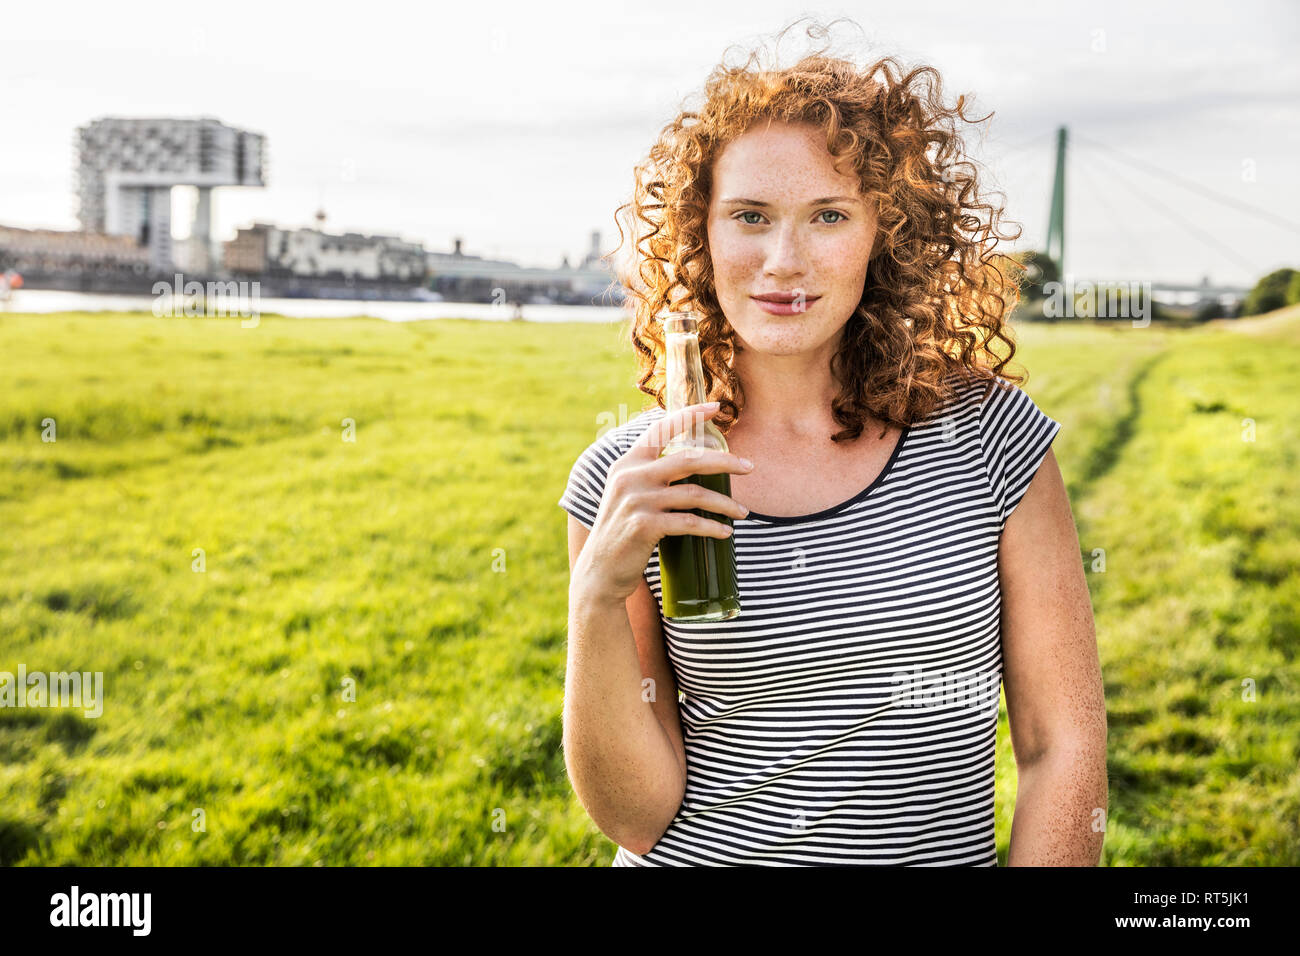 Germany, Cologne, portrait of redheaded young woman with beverage Stock Photo